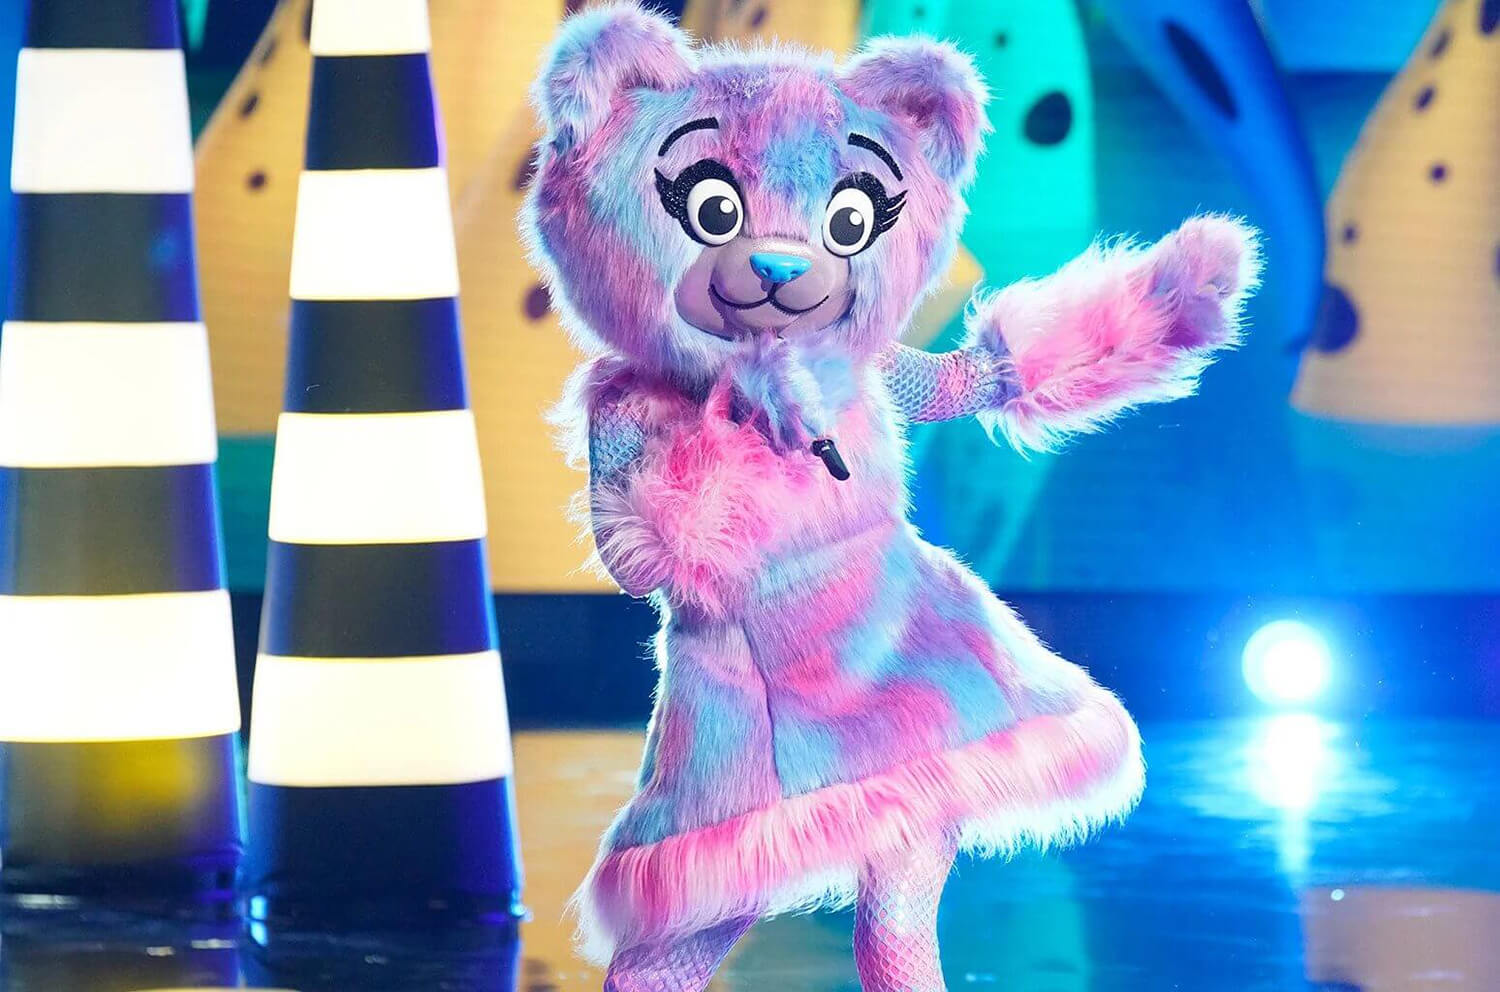 Bear performs on The Masked Singer Season 3 before one of the most surprising celebrity reveals.